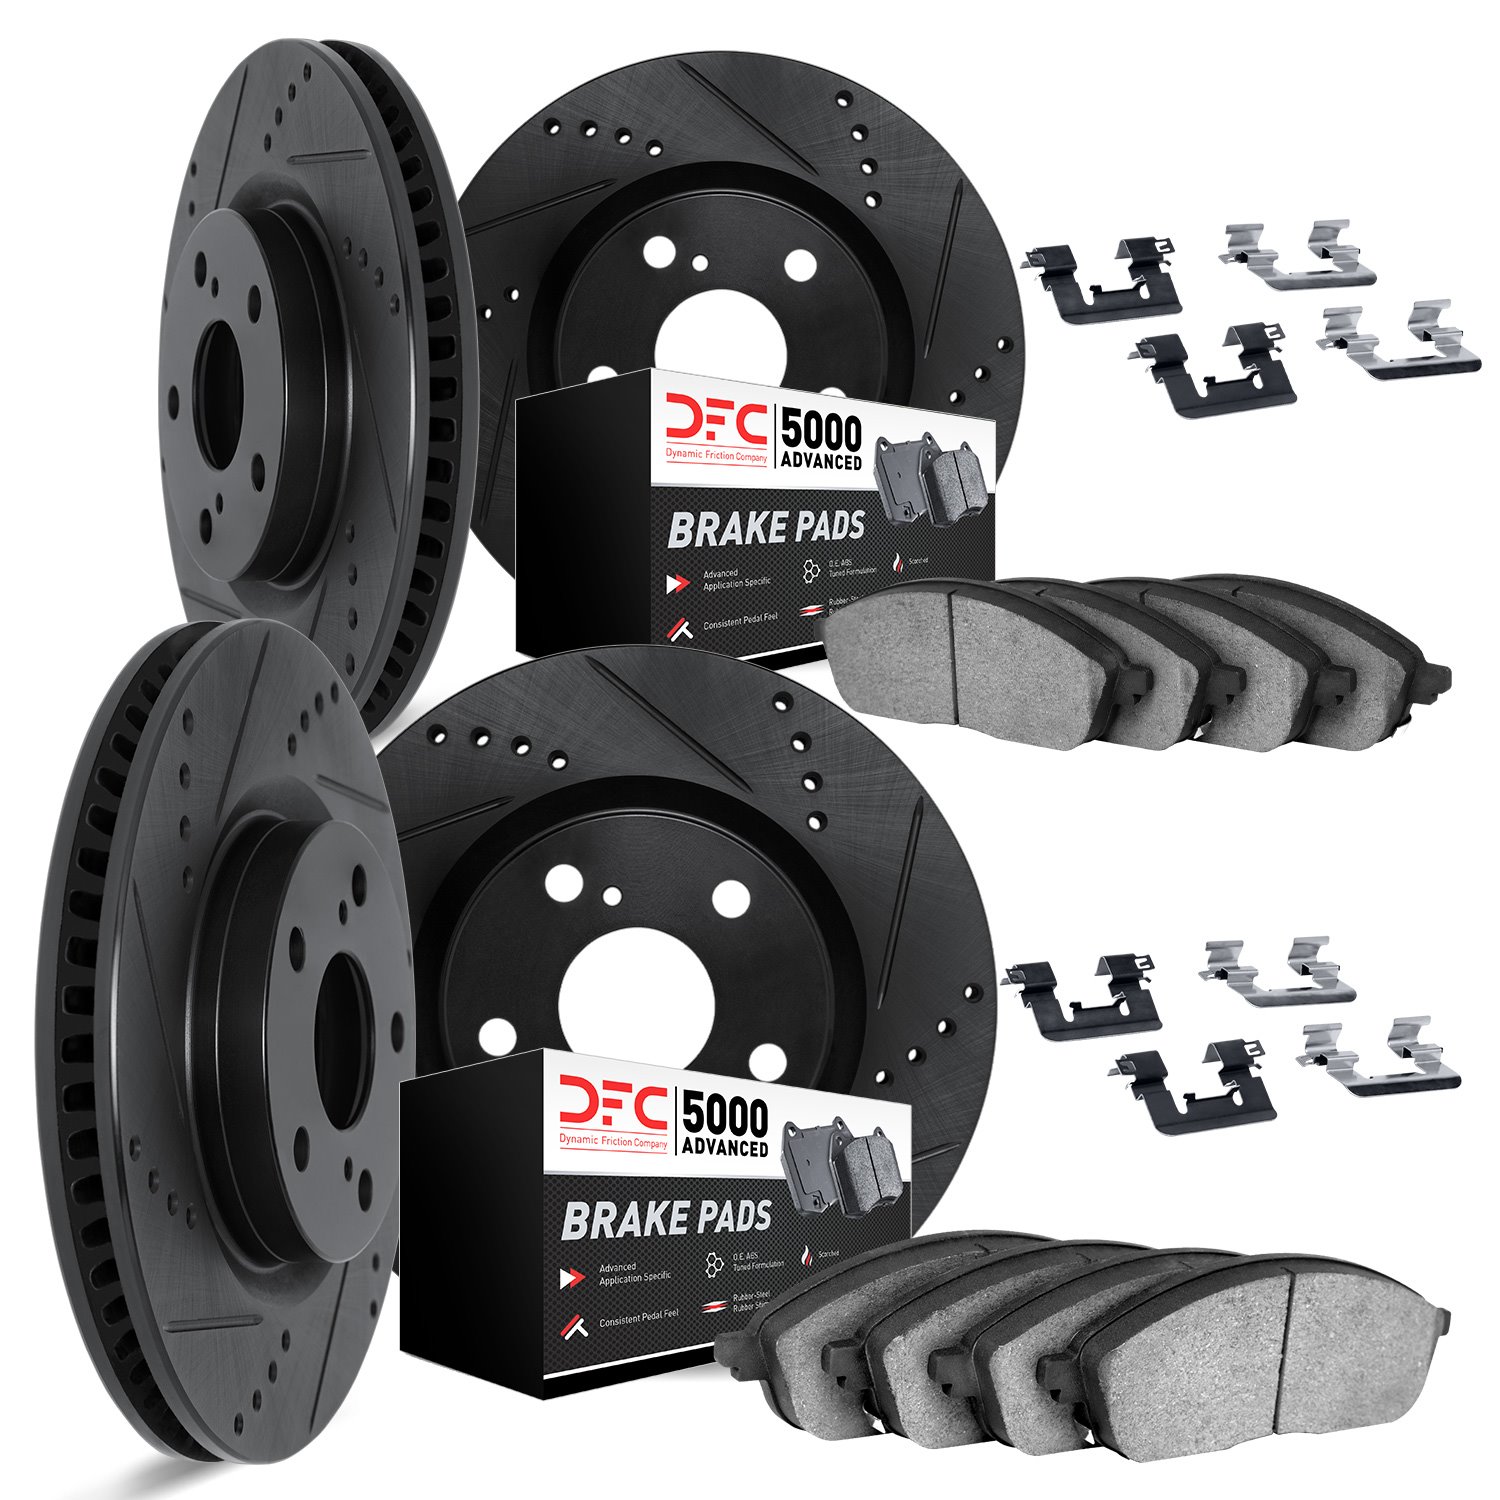 8514-31075 Drilled/Slotted Brake Rotors w/5000 Advanced Brake Pads Kit & Hardware [Black], 2017-2020 BMW, Position: Front and Re